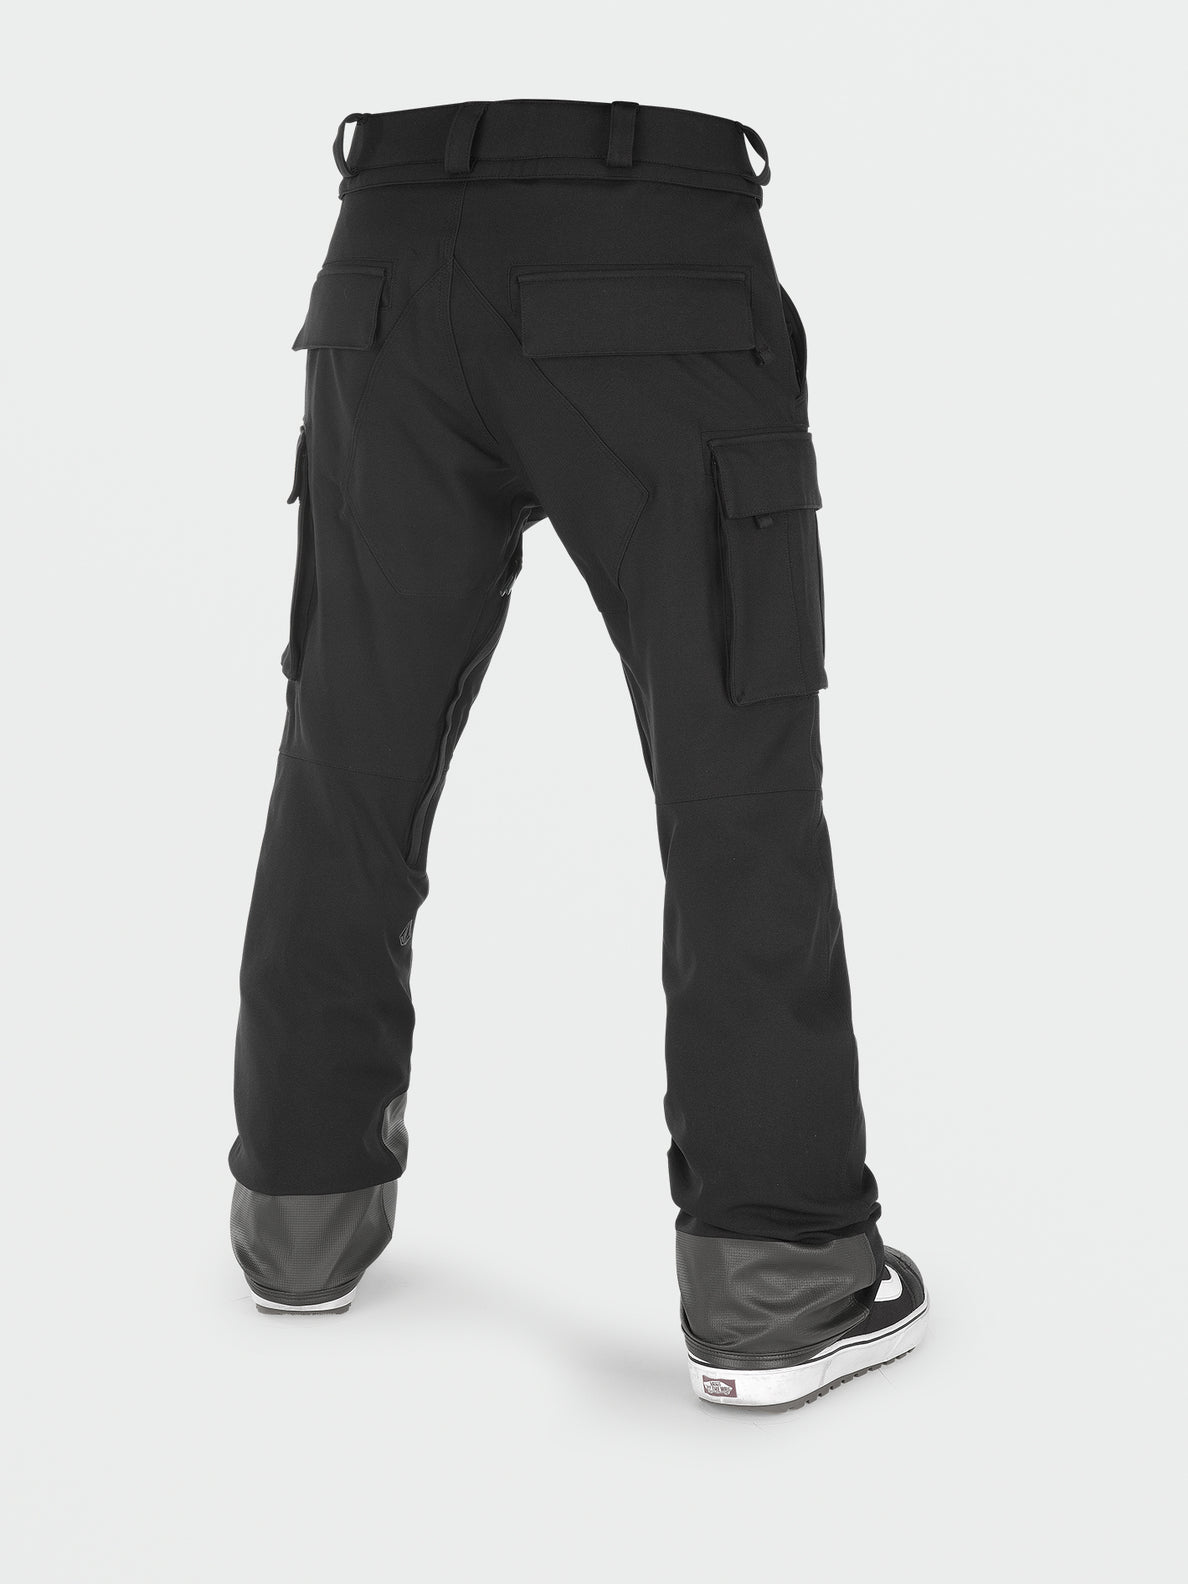 Mens New Articulated Pants - Black (G1352305_BLK) [2]